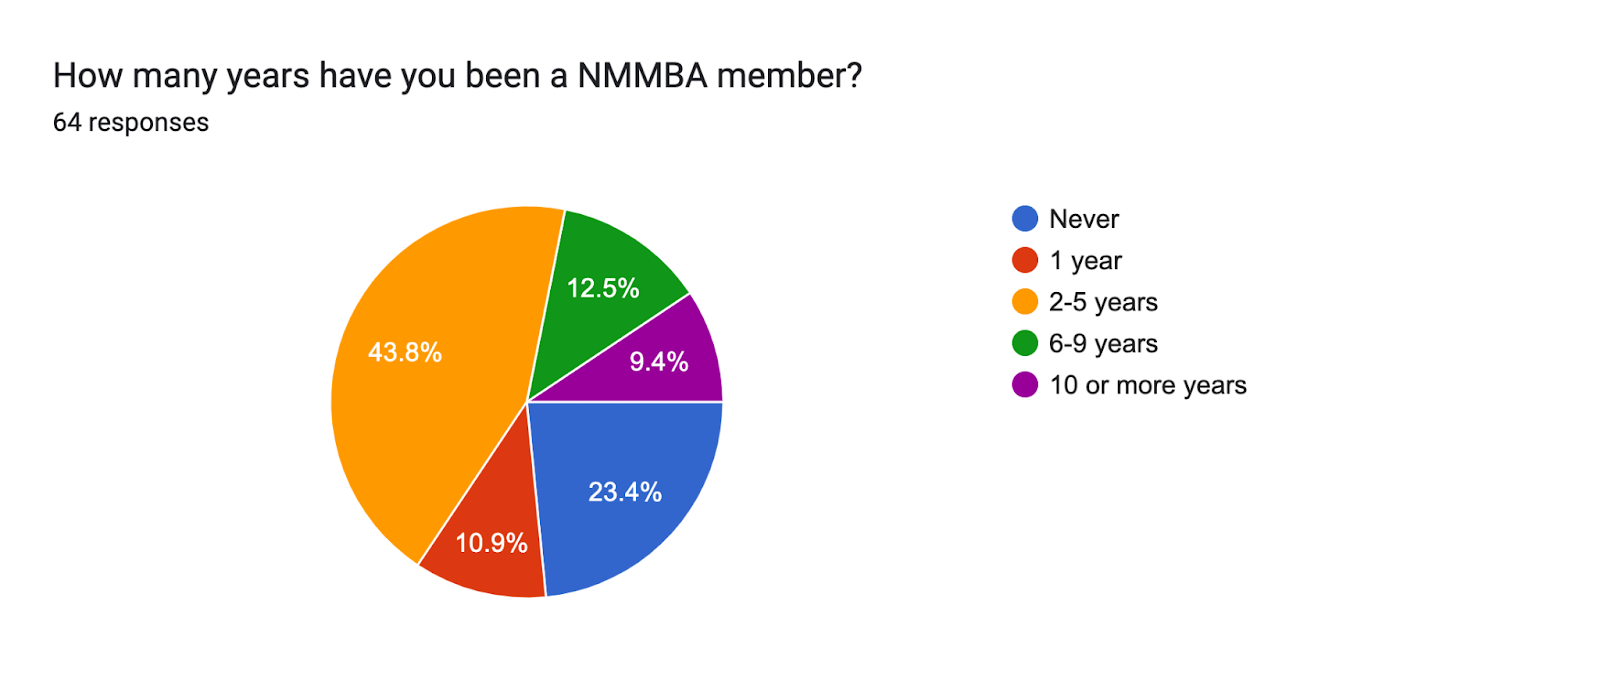 Forms response chart. Question title: How many years have you been a NMMBA member?. Number of responses: 64 responses.